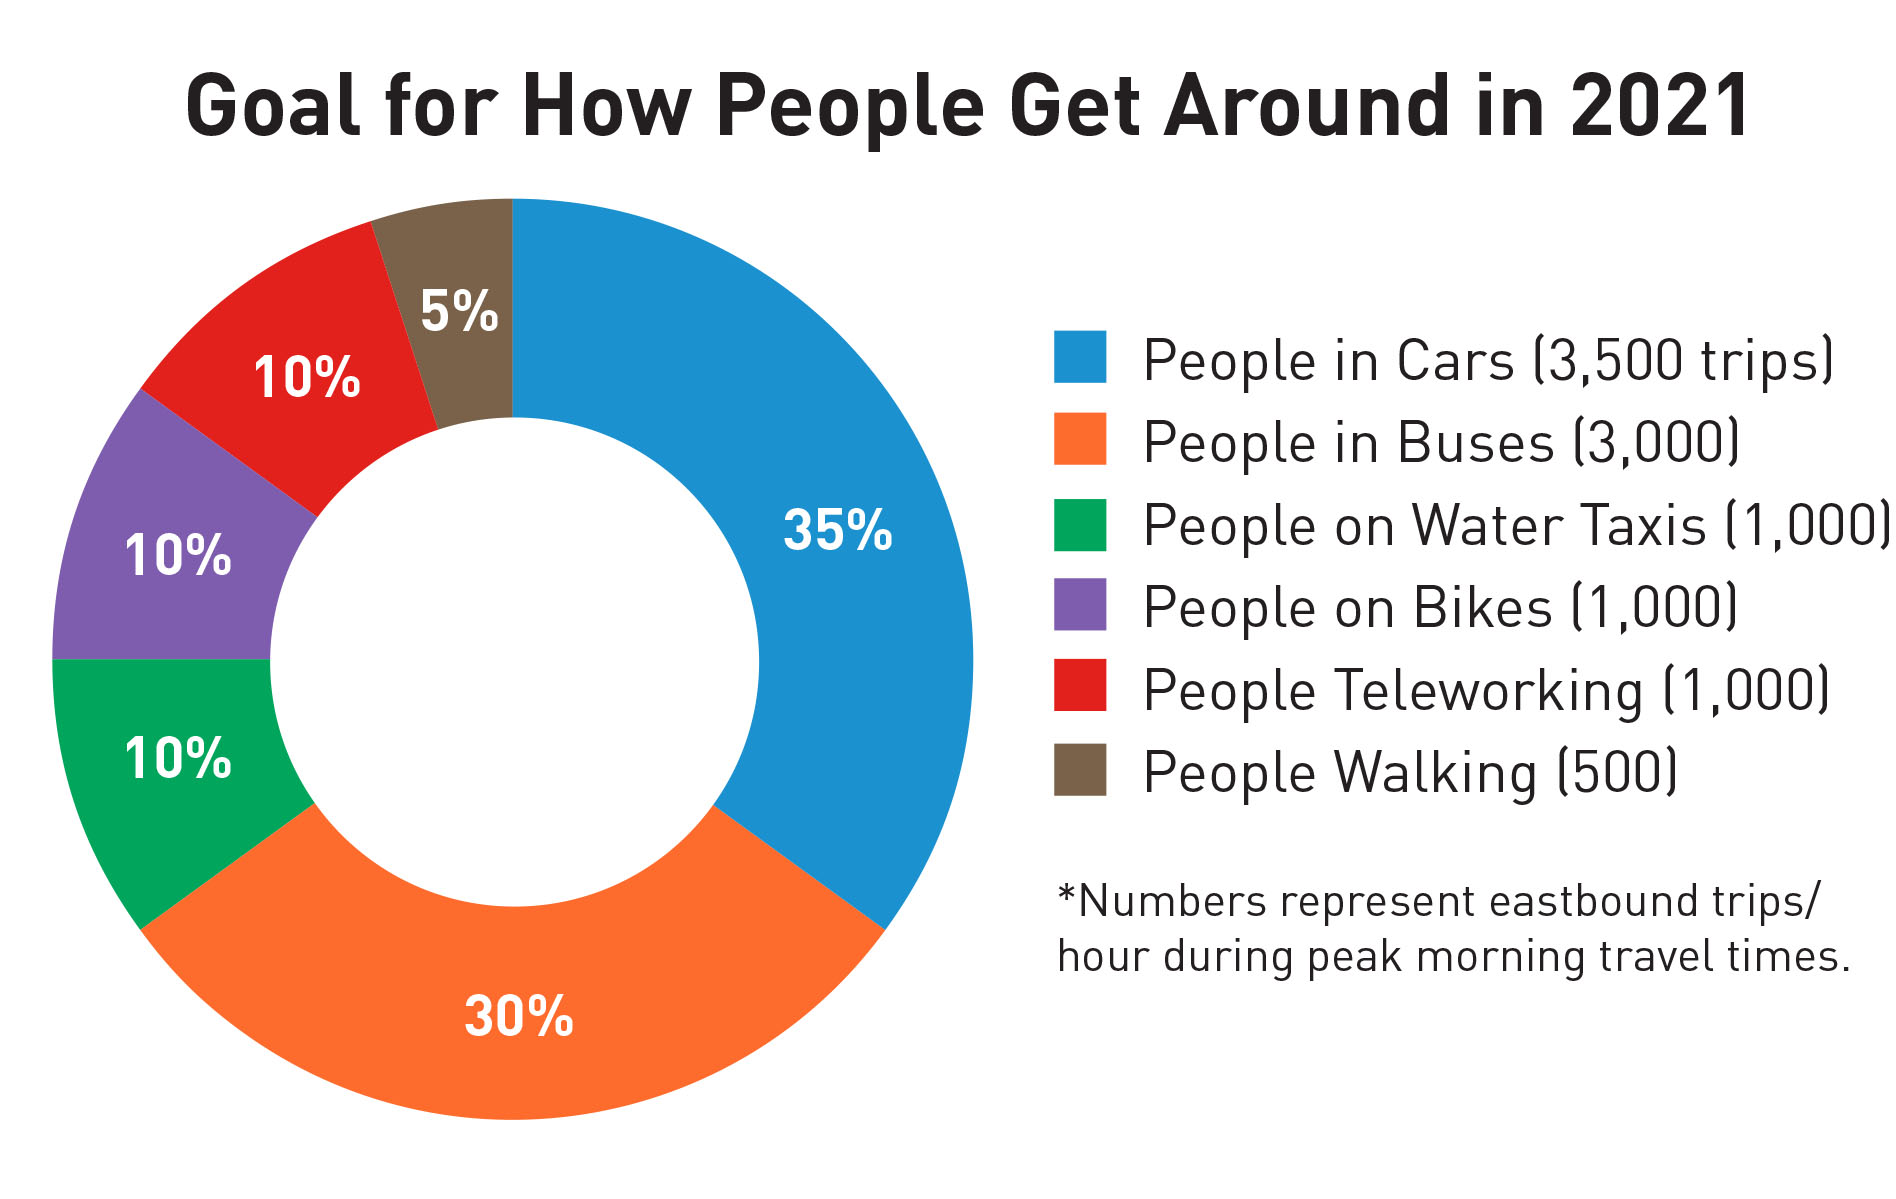 Pie chart showing our goal for how people get around in 2021. People in cars 35%, People in buses 30%, people on water taxis 10%, people on bikes 10%, people walking 5%